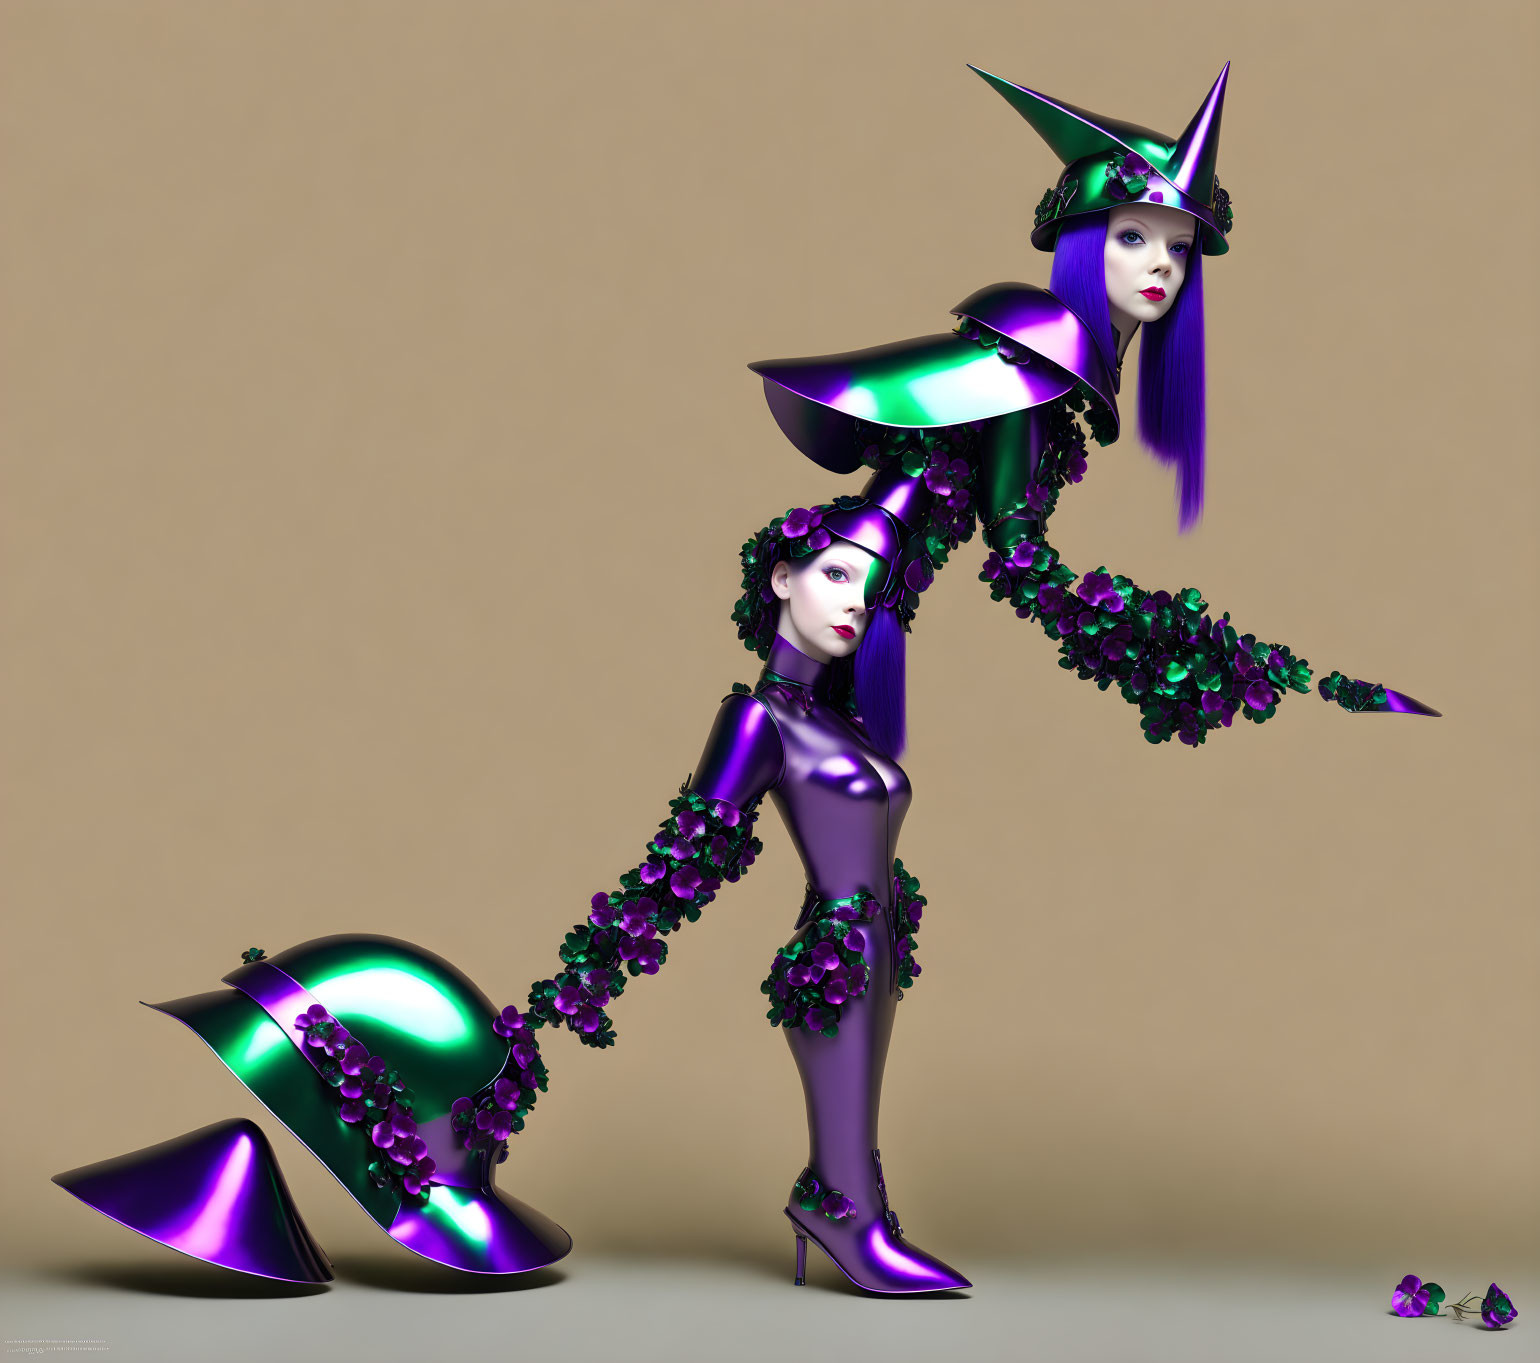 Futuristic female figures in metallic purple and green outfits with floral accents on tan background